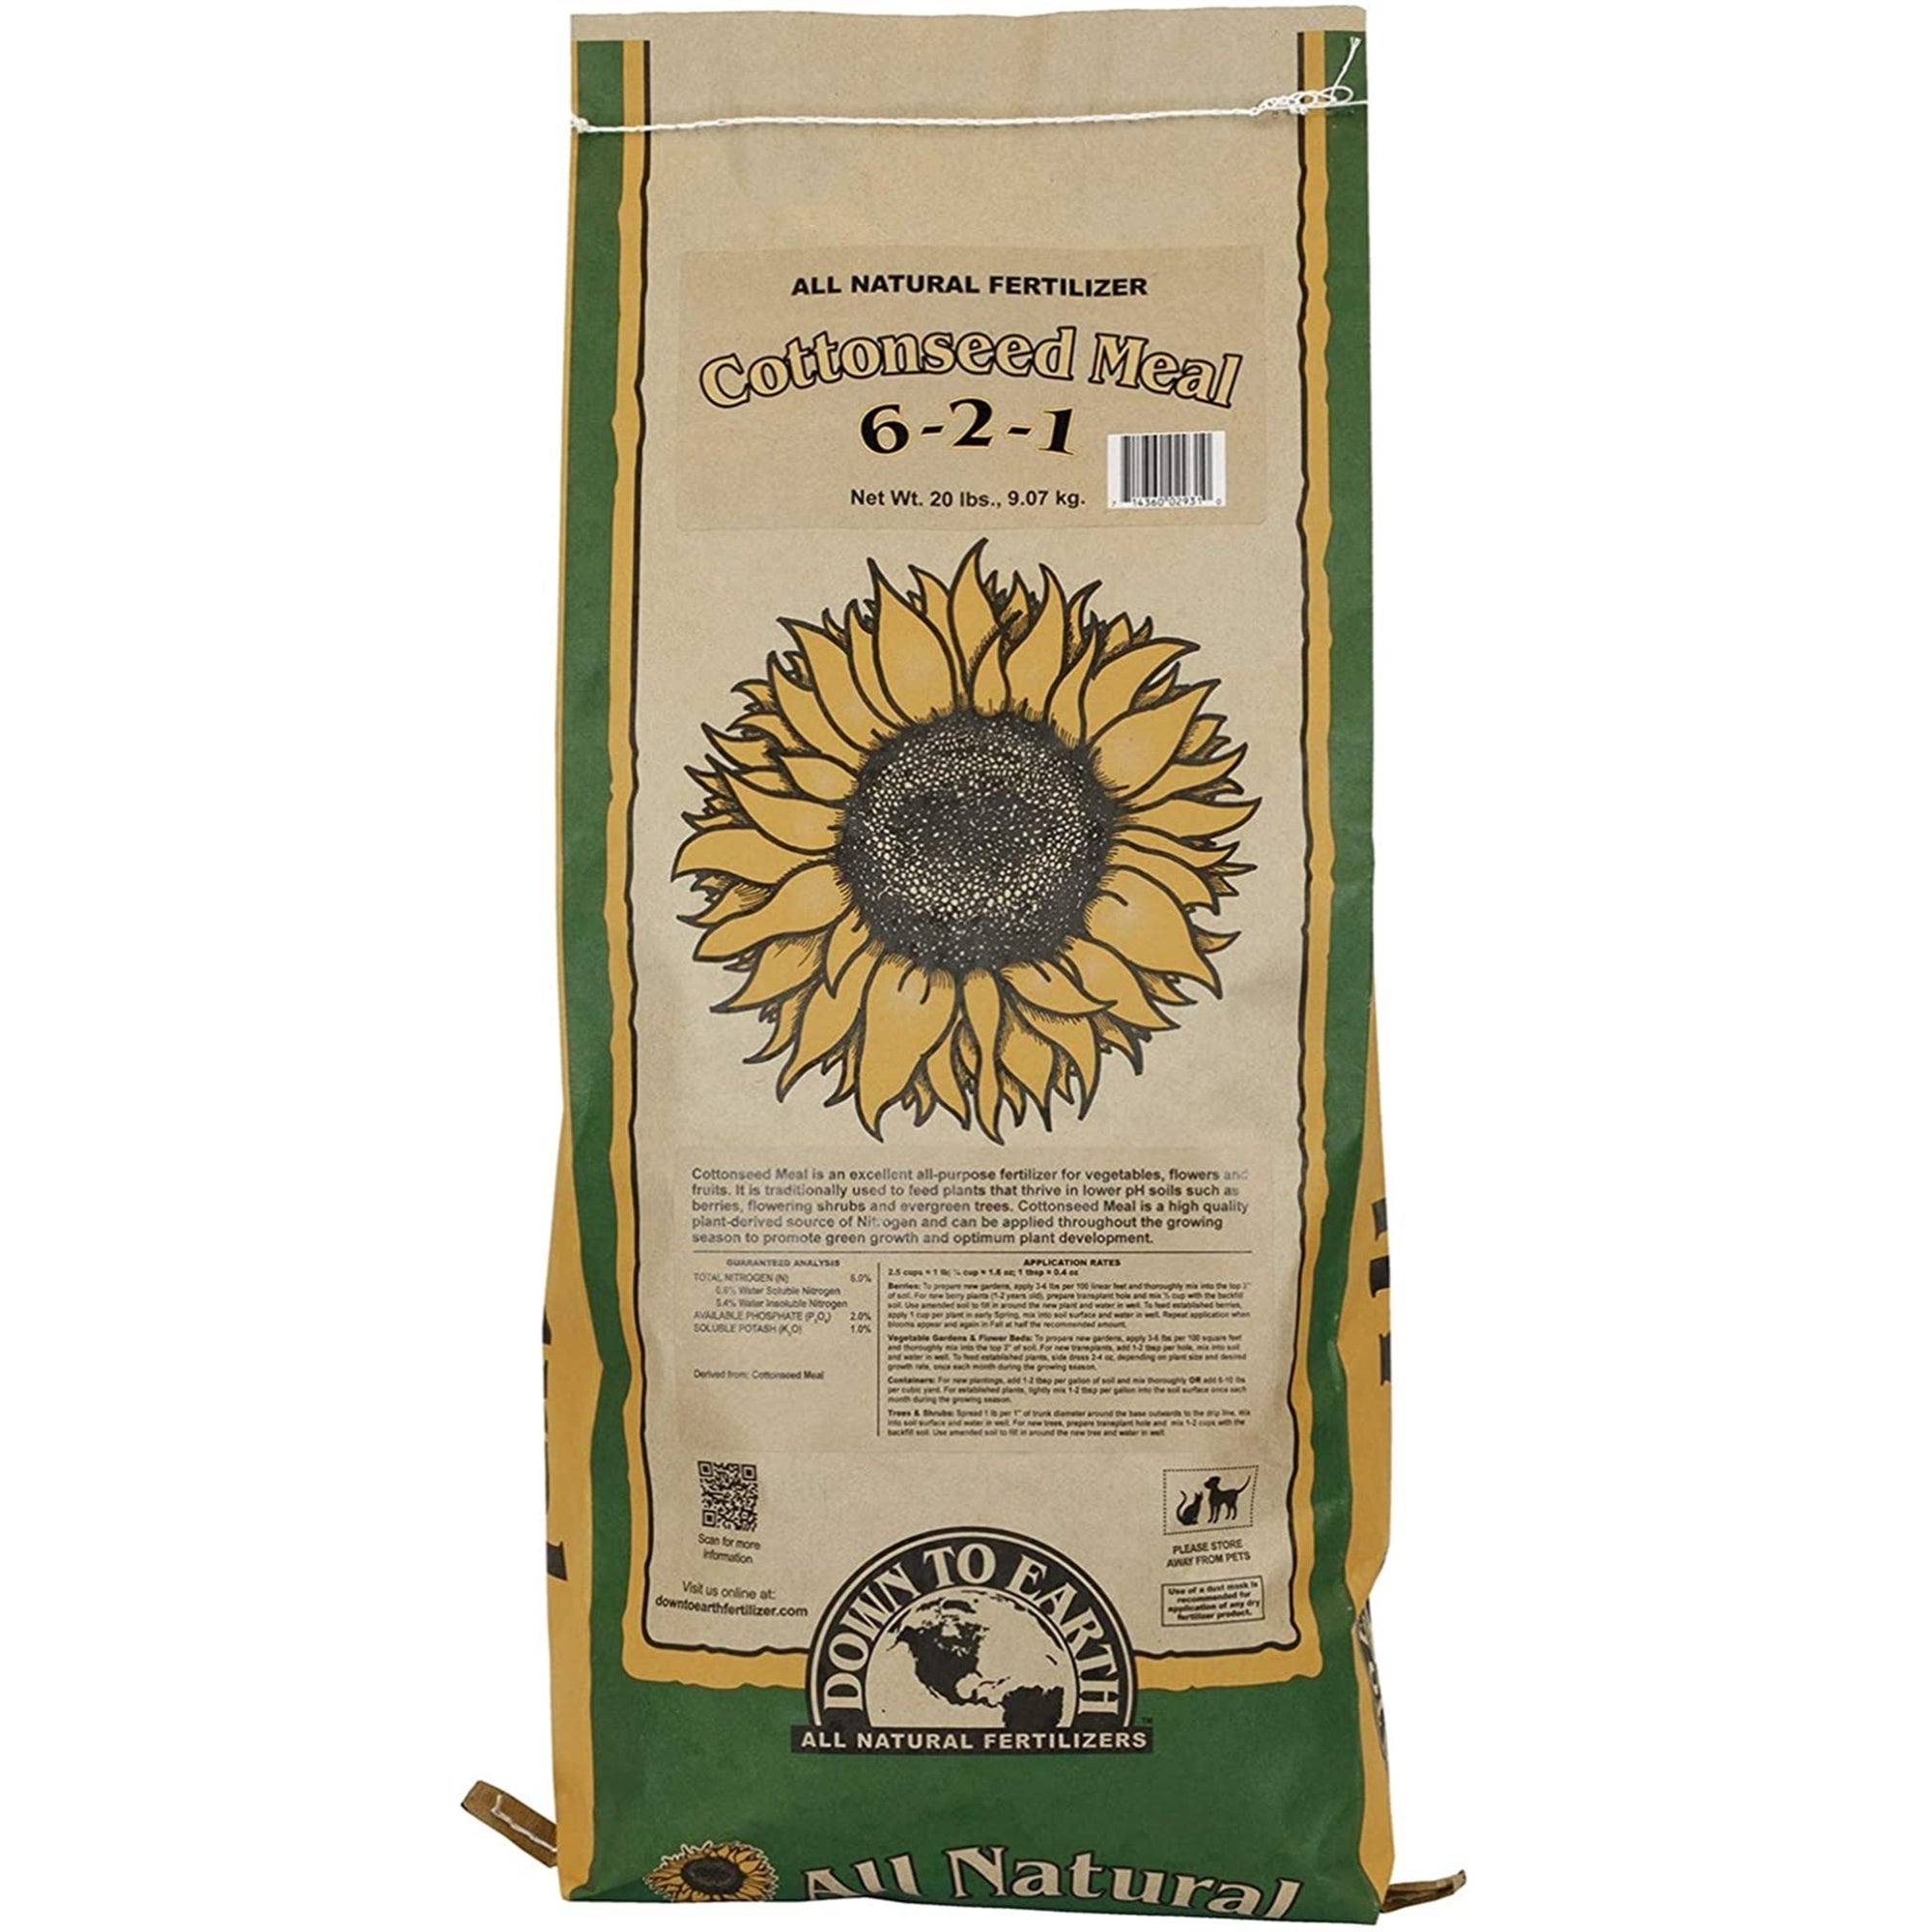 Down to Earth All Natural Cottonseed Meal Fertilizer 6-2-1, 20 lb